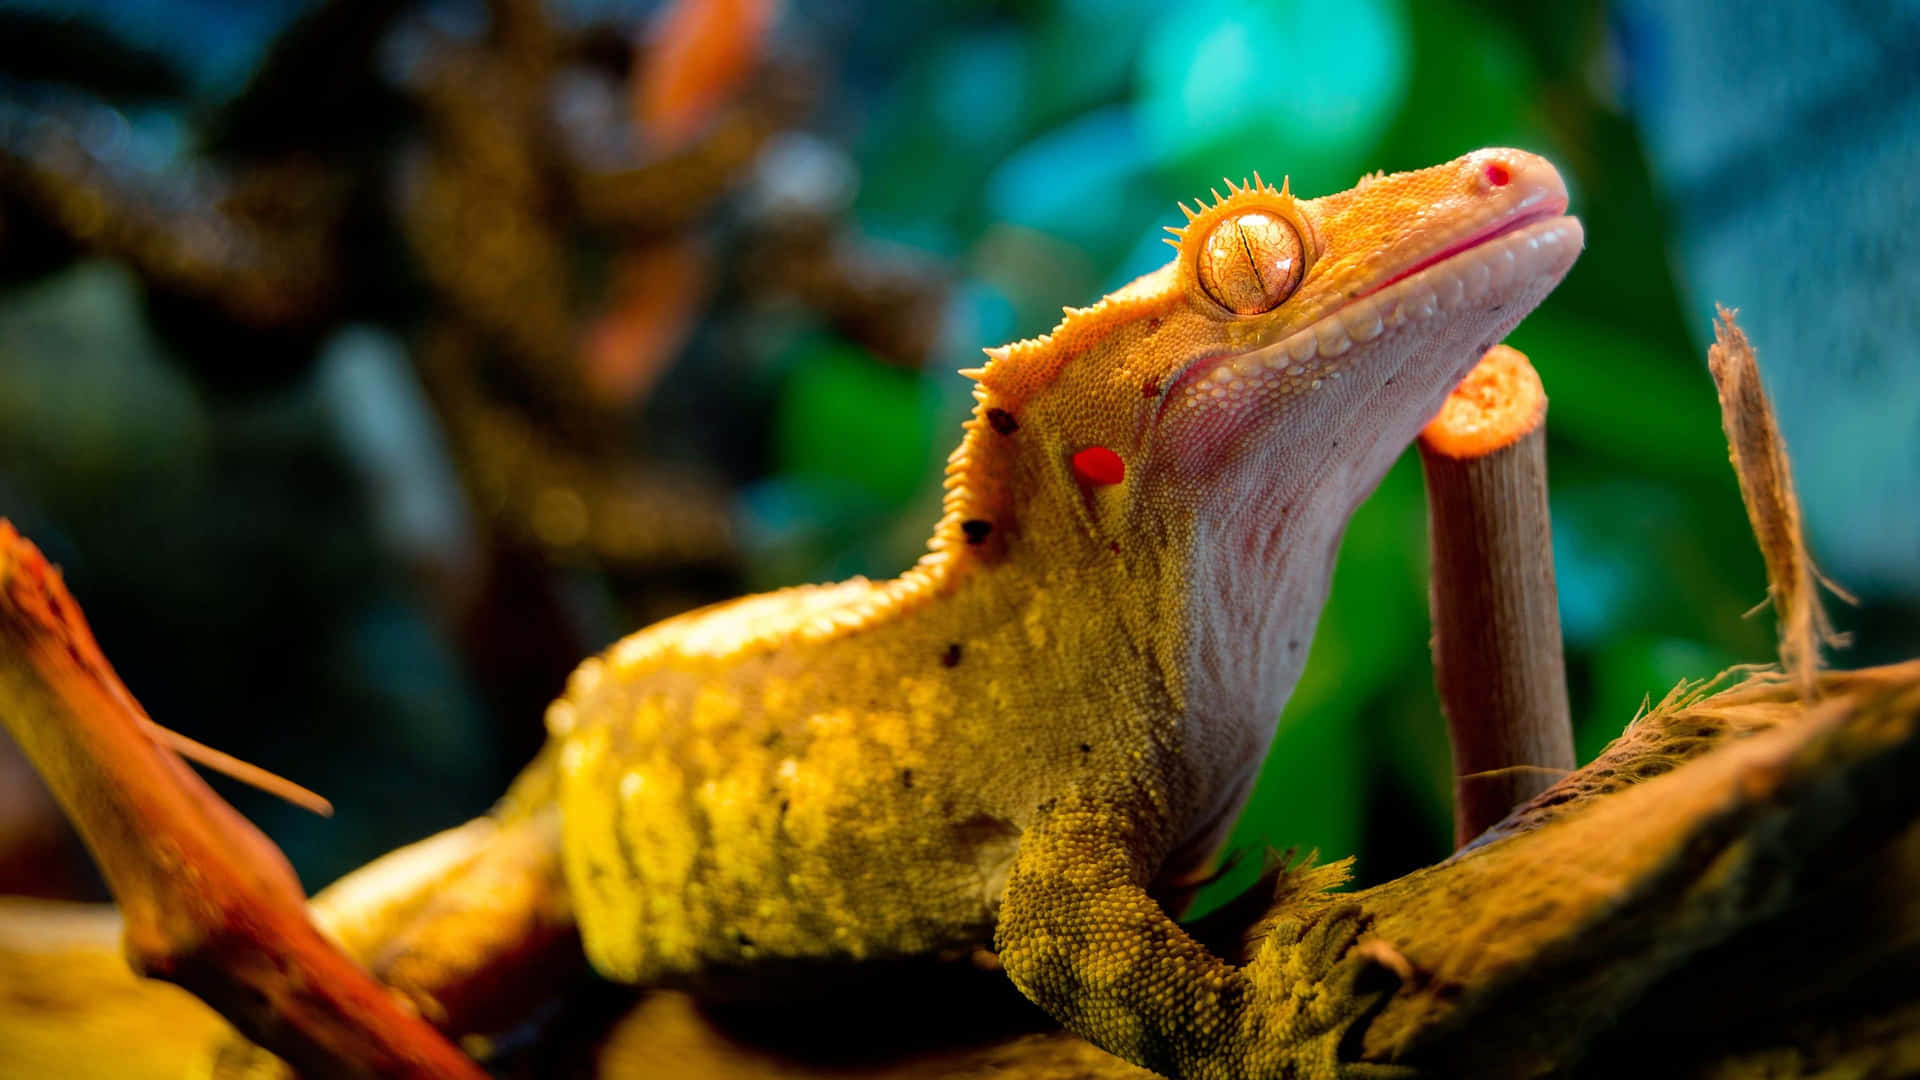 Crested Gecko Lizard Bokeh Picture